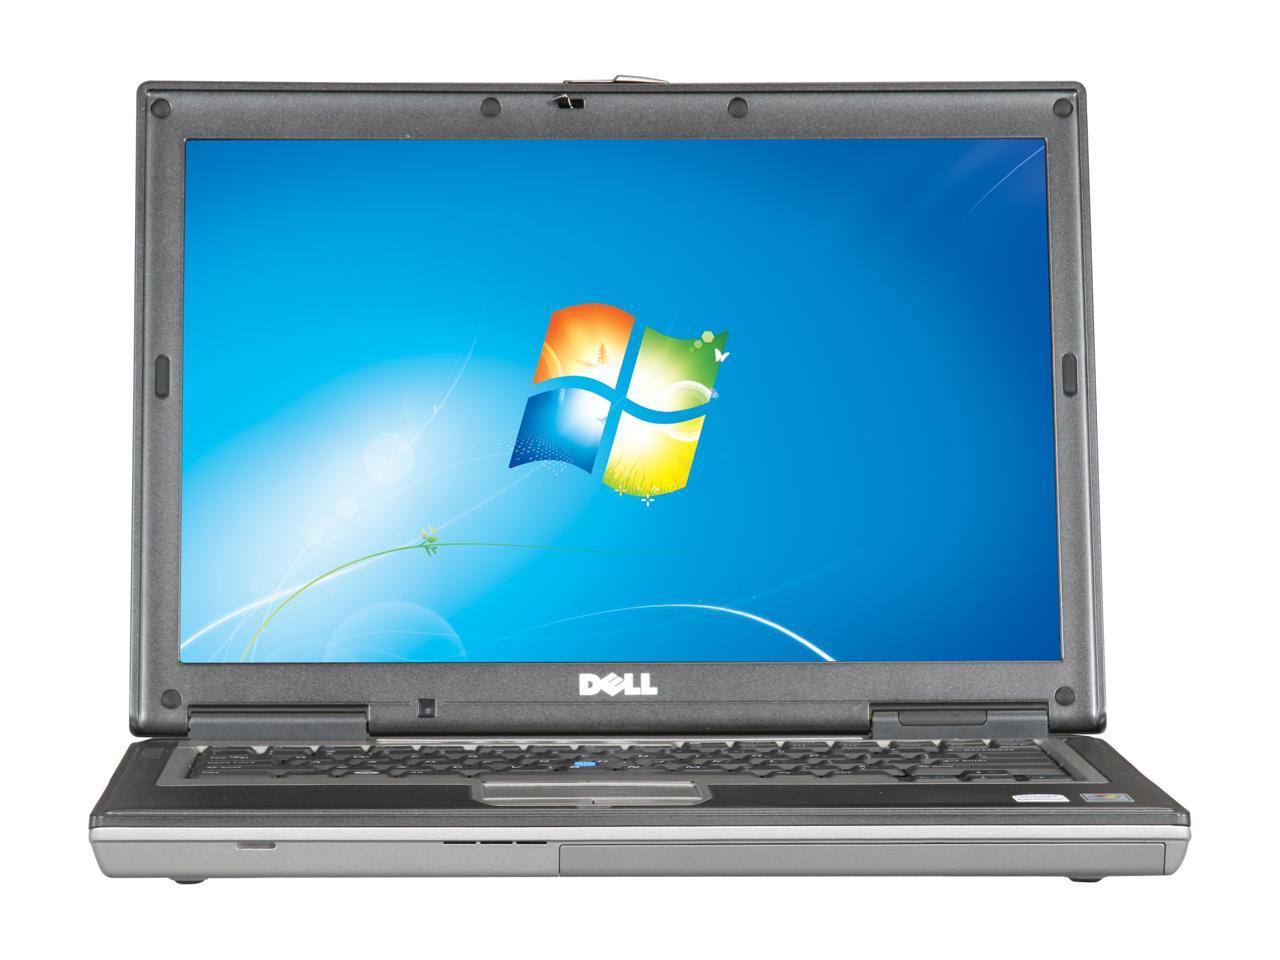 Refurbished: DELL Laptop Latitude D630 Intel Core 2 Duo 1.80 GHz 2 GB